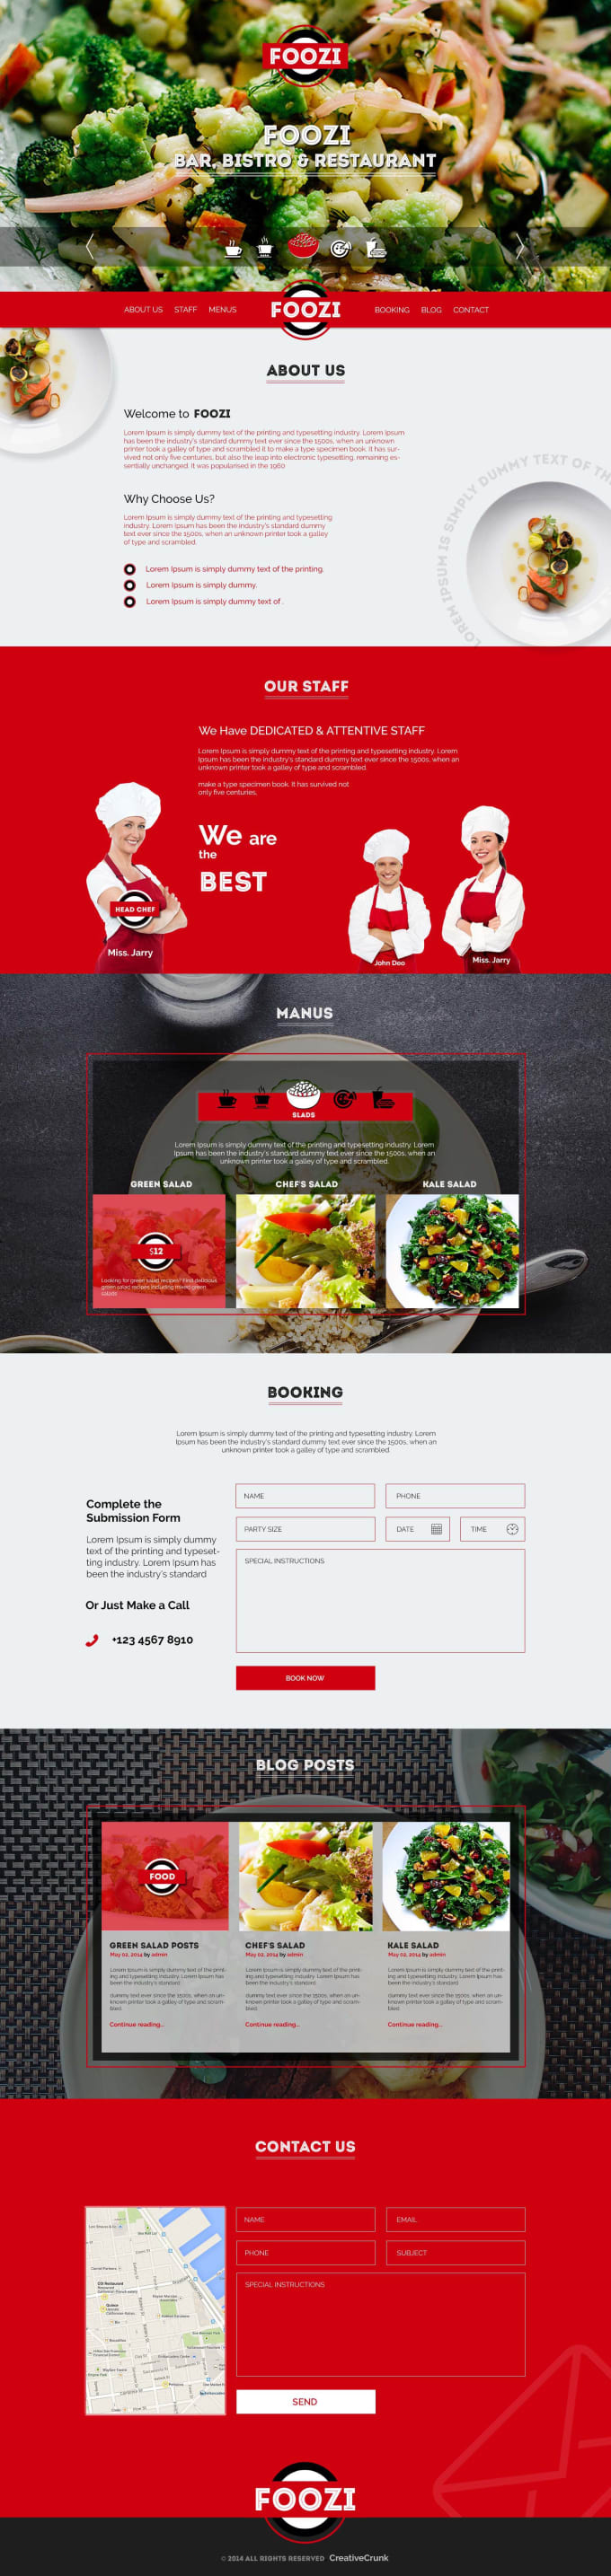 I will design an creative getresponse email template